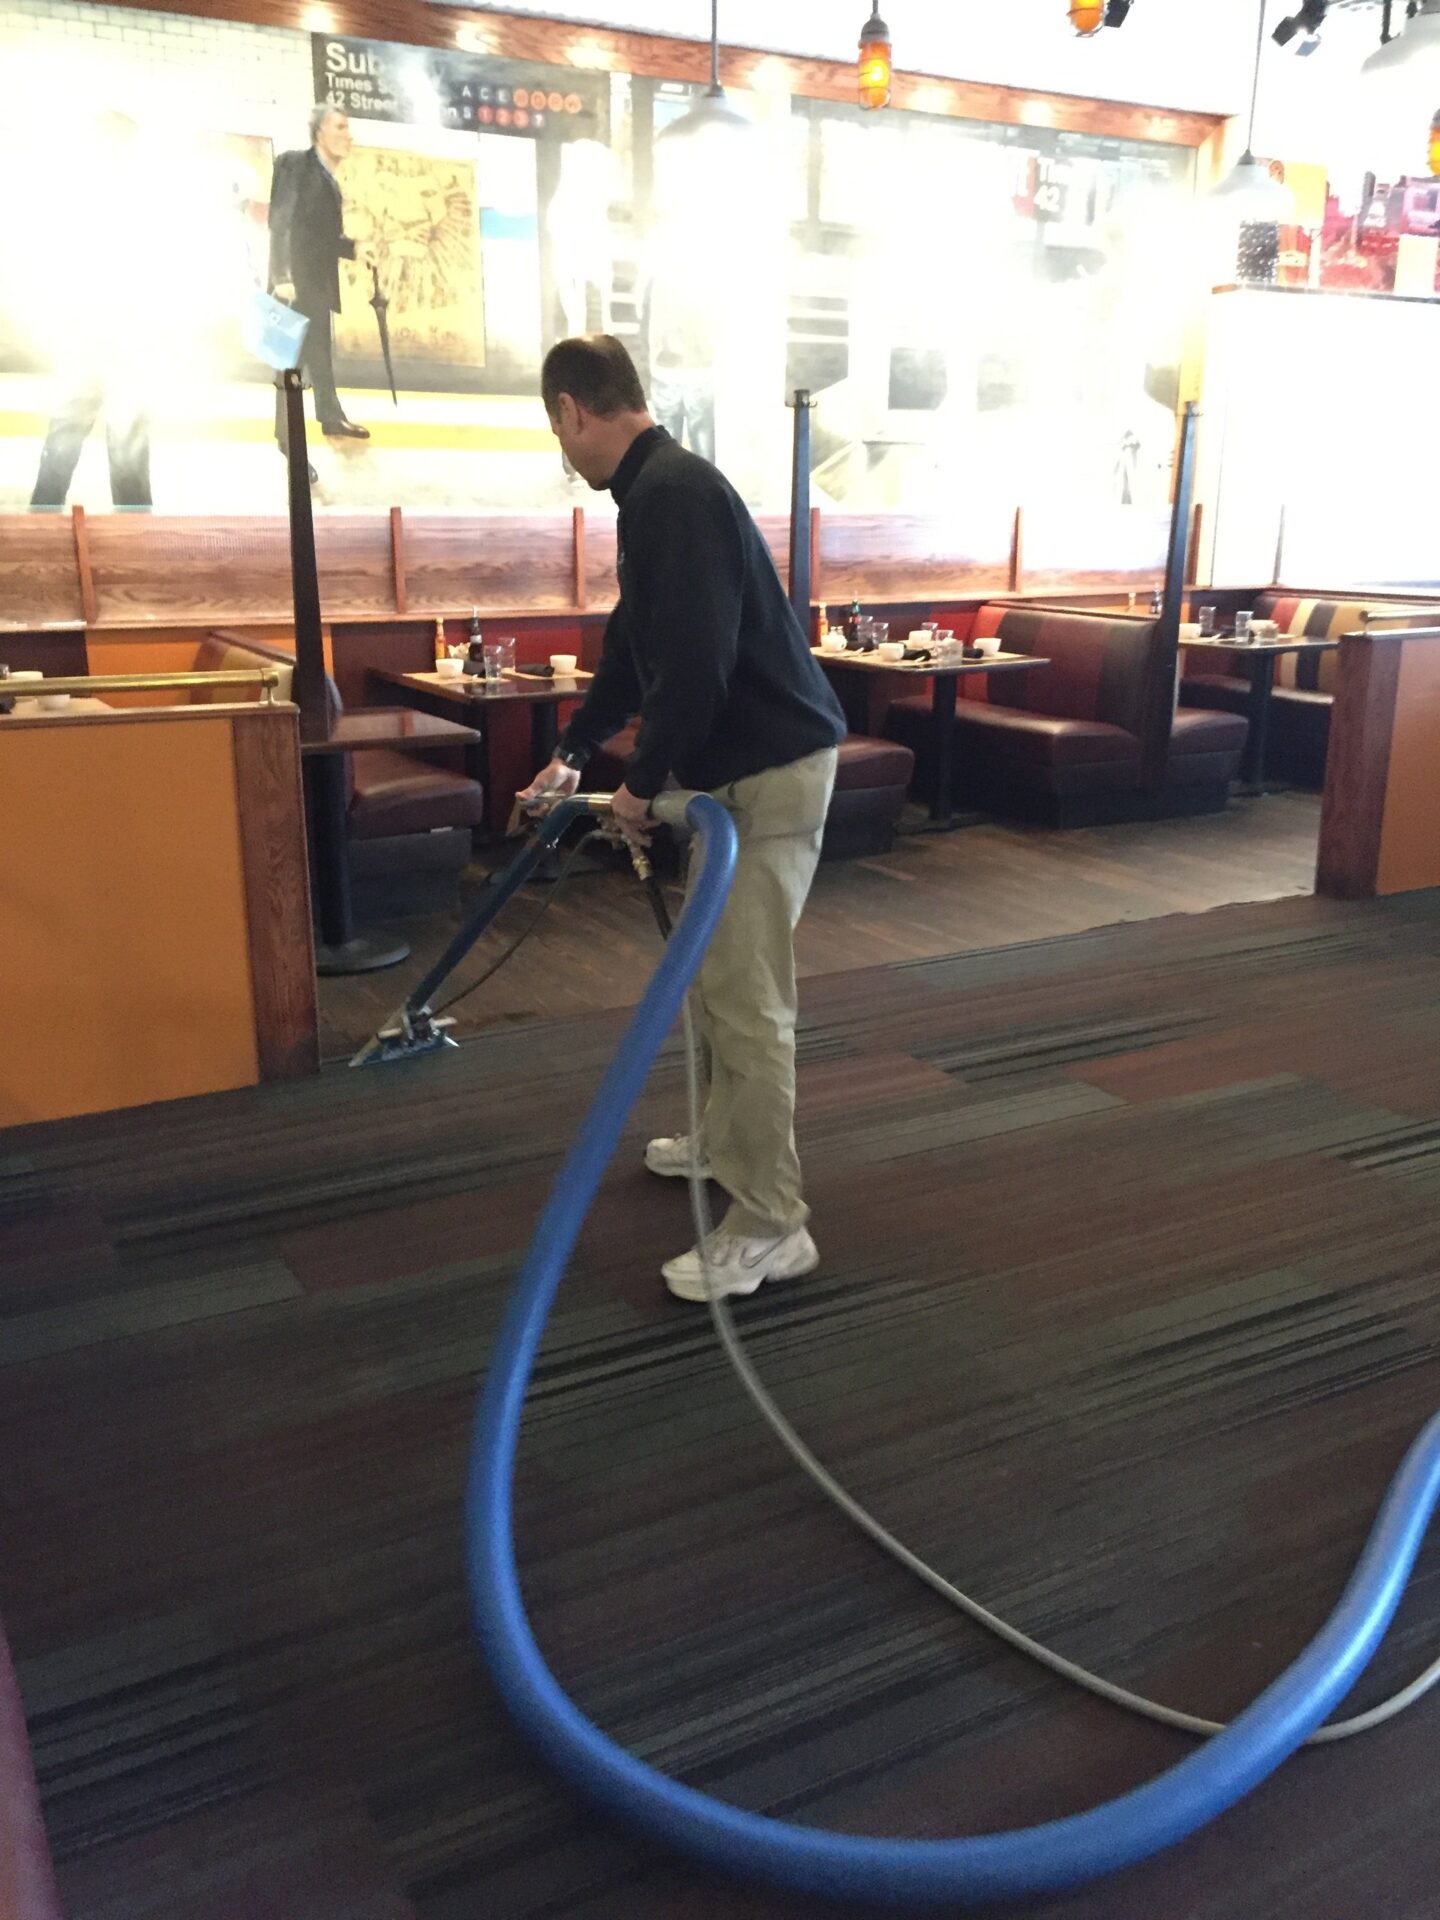 A person cleaning the floor with a vacuum cleaner